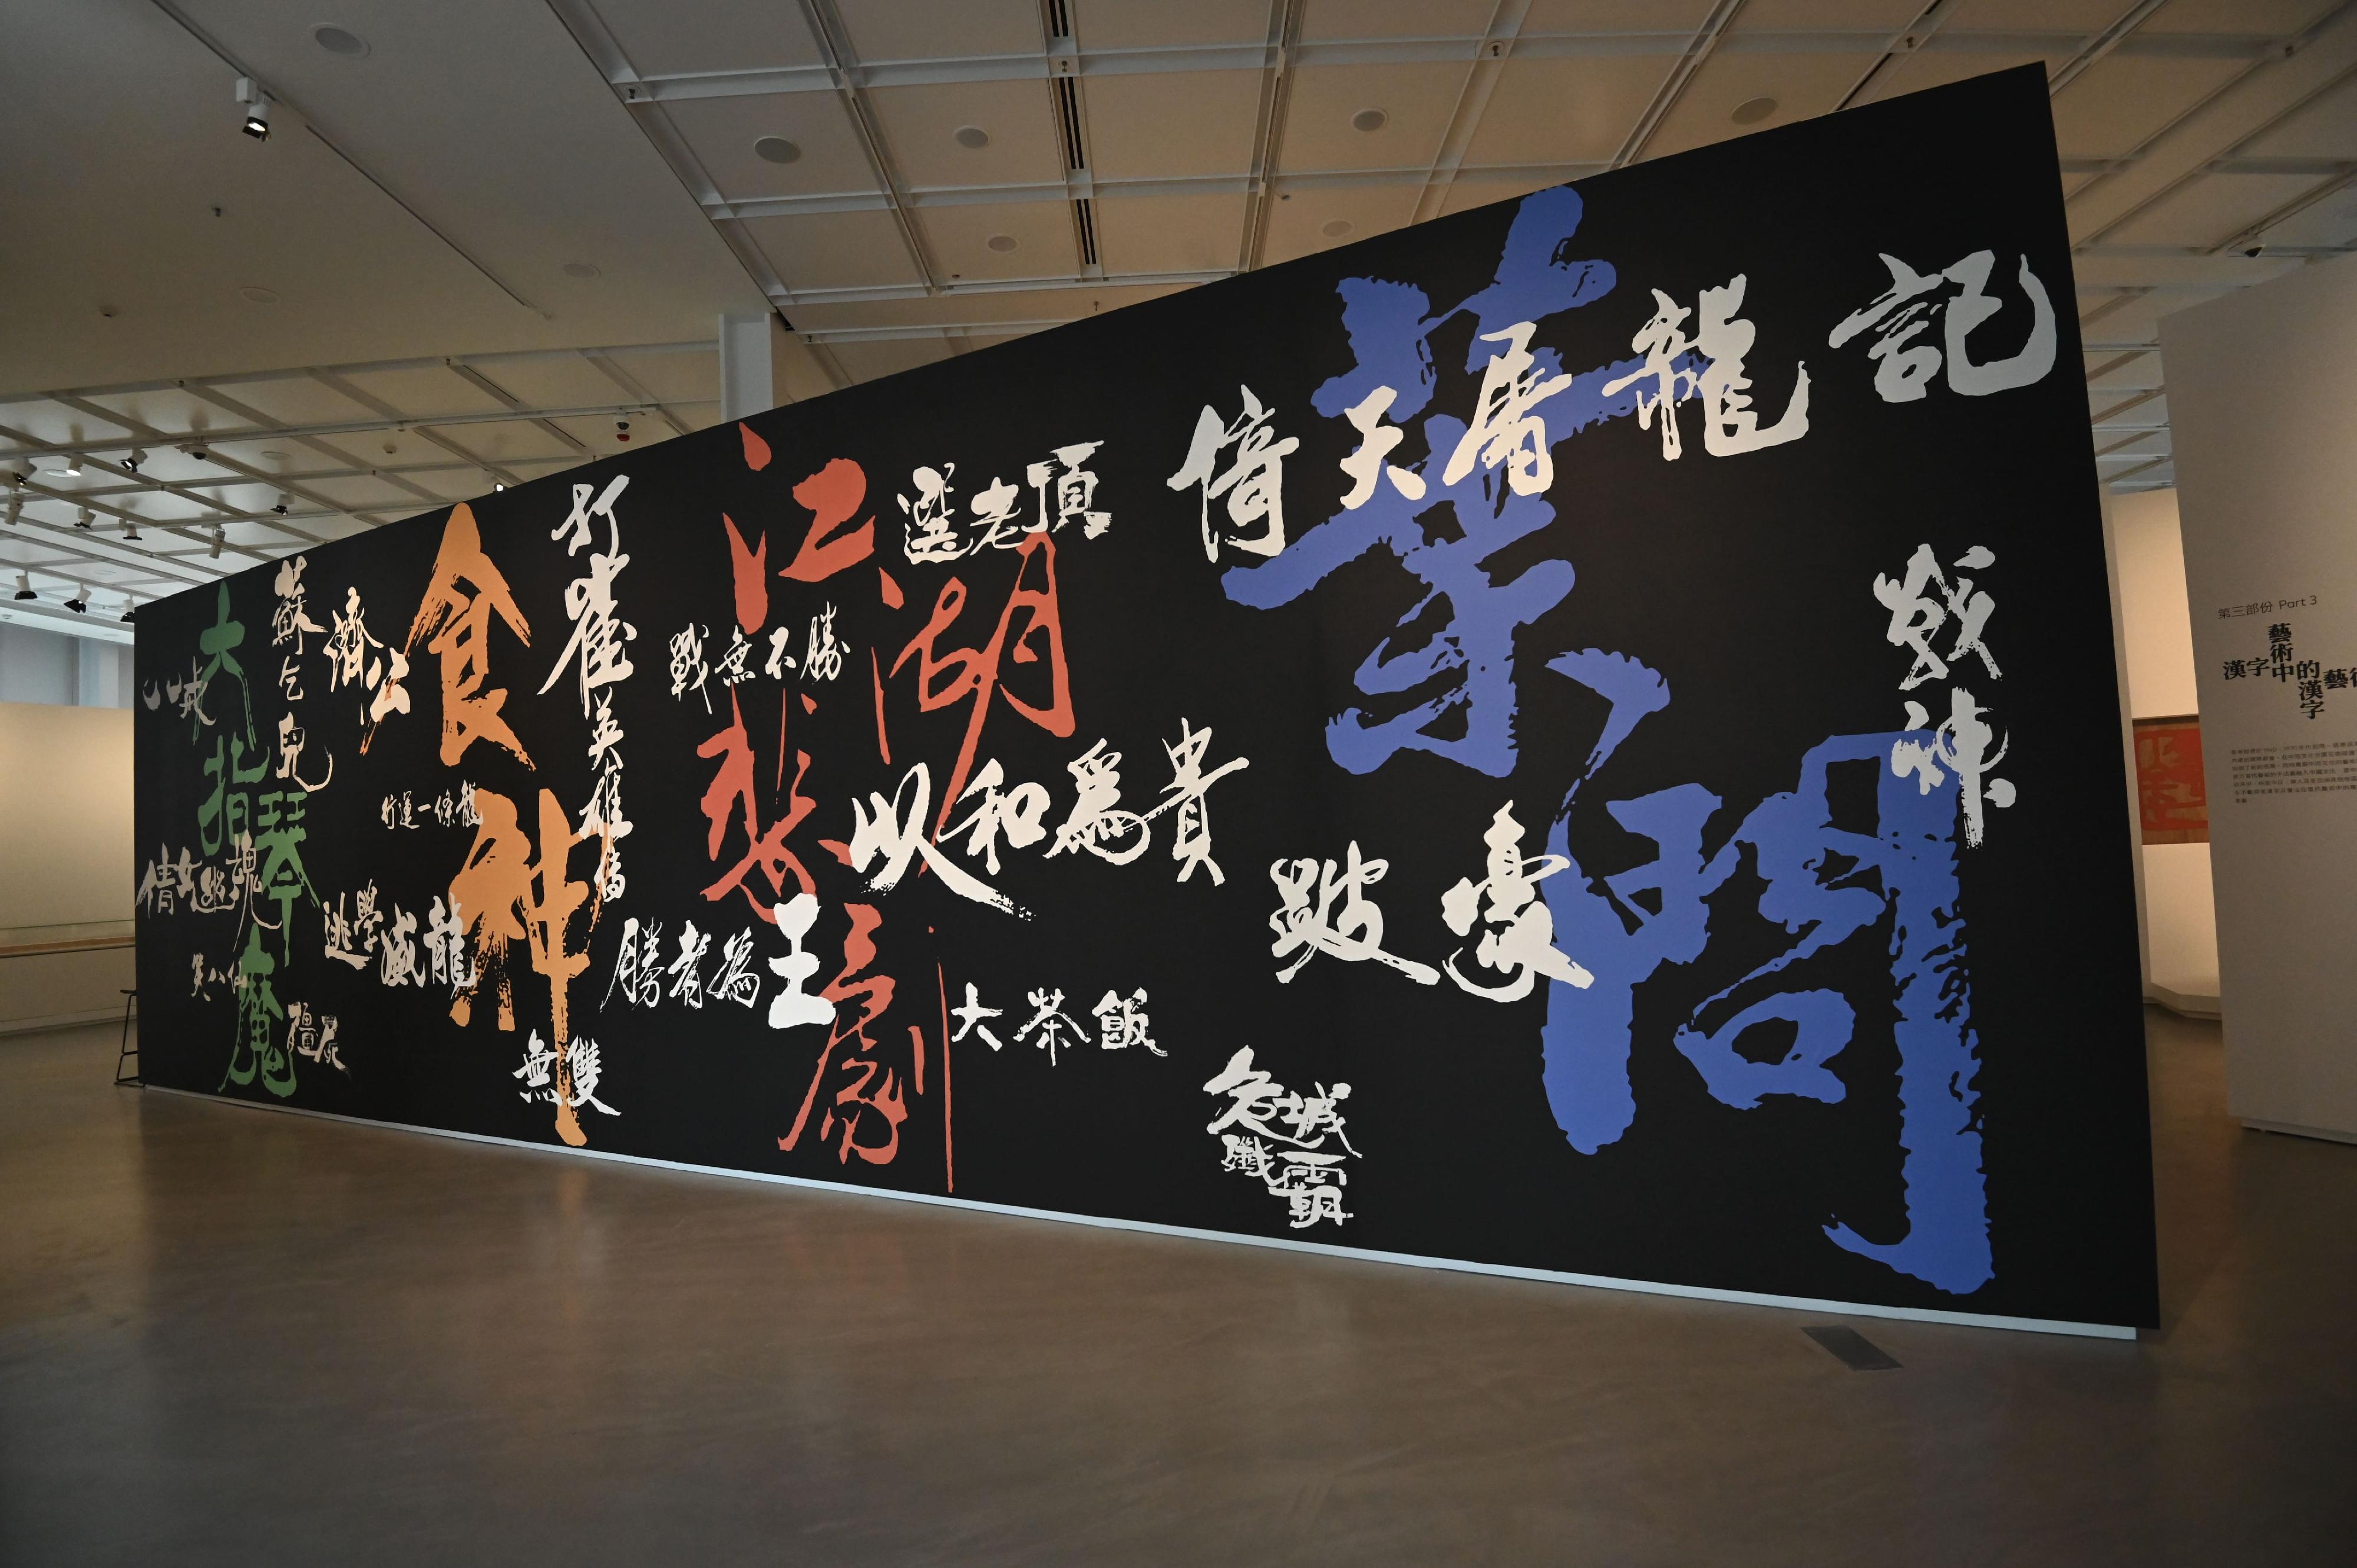 The "By the People: Creative Chinese Characters" exhibition will be staged from tomorrow (September 9) at the Hong Kong Museum of Art. Picture shows calligraphy works for Hong Kong movies by Fung Siu-wa (Wah Gor) and Lui Chiu-wing.